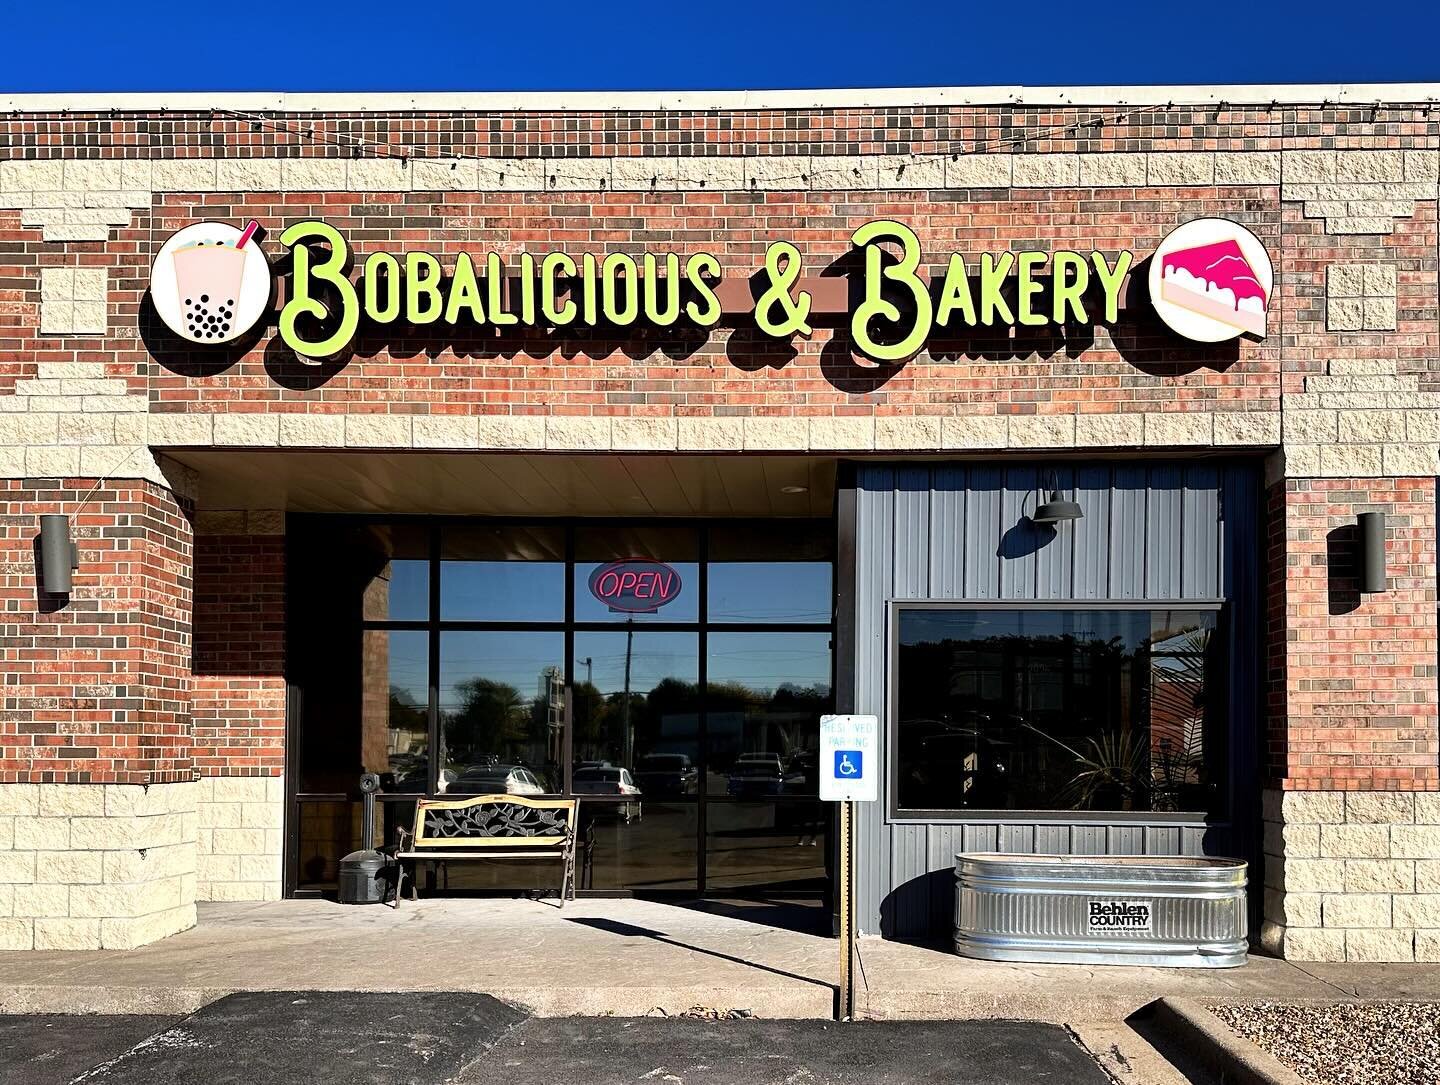 We&rsquo;re OPEN! Come see us in the Imperial Plaza shopping center located on the corner of Campbell and Battlefield. Grab a boba drink or try one of our ever changing bakery items. 

📍 2926 S Campbell Ave Springfield, MO 65807
⏰ Mon-Sat: 11a-8p, S